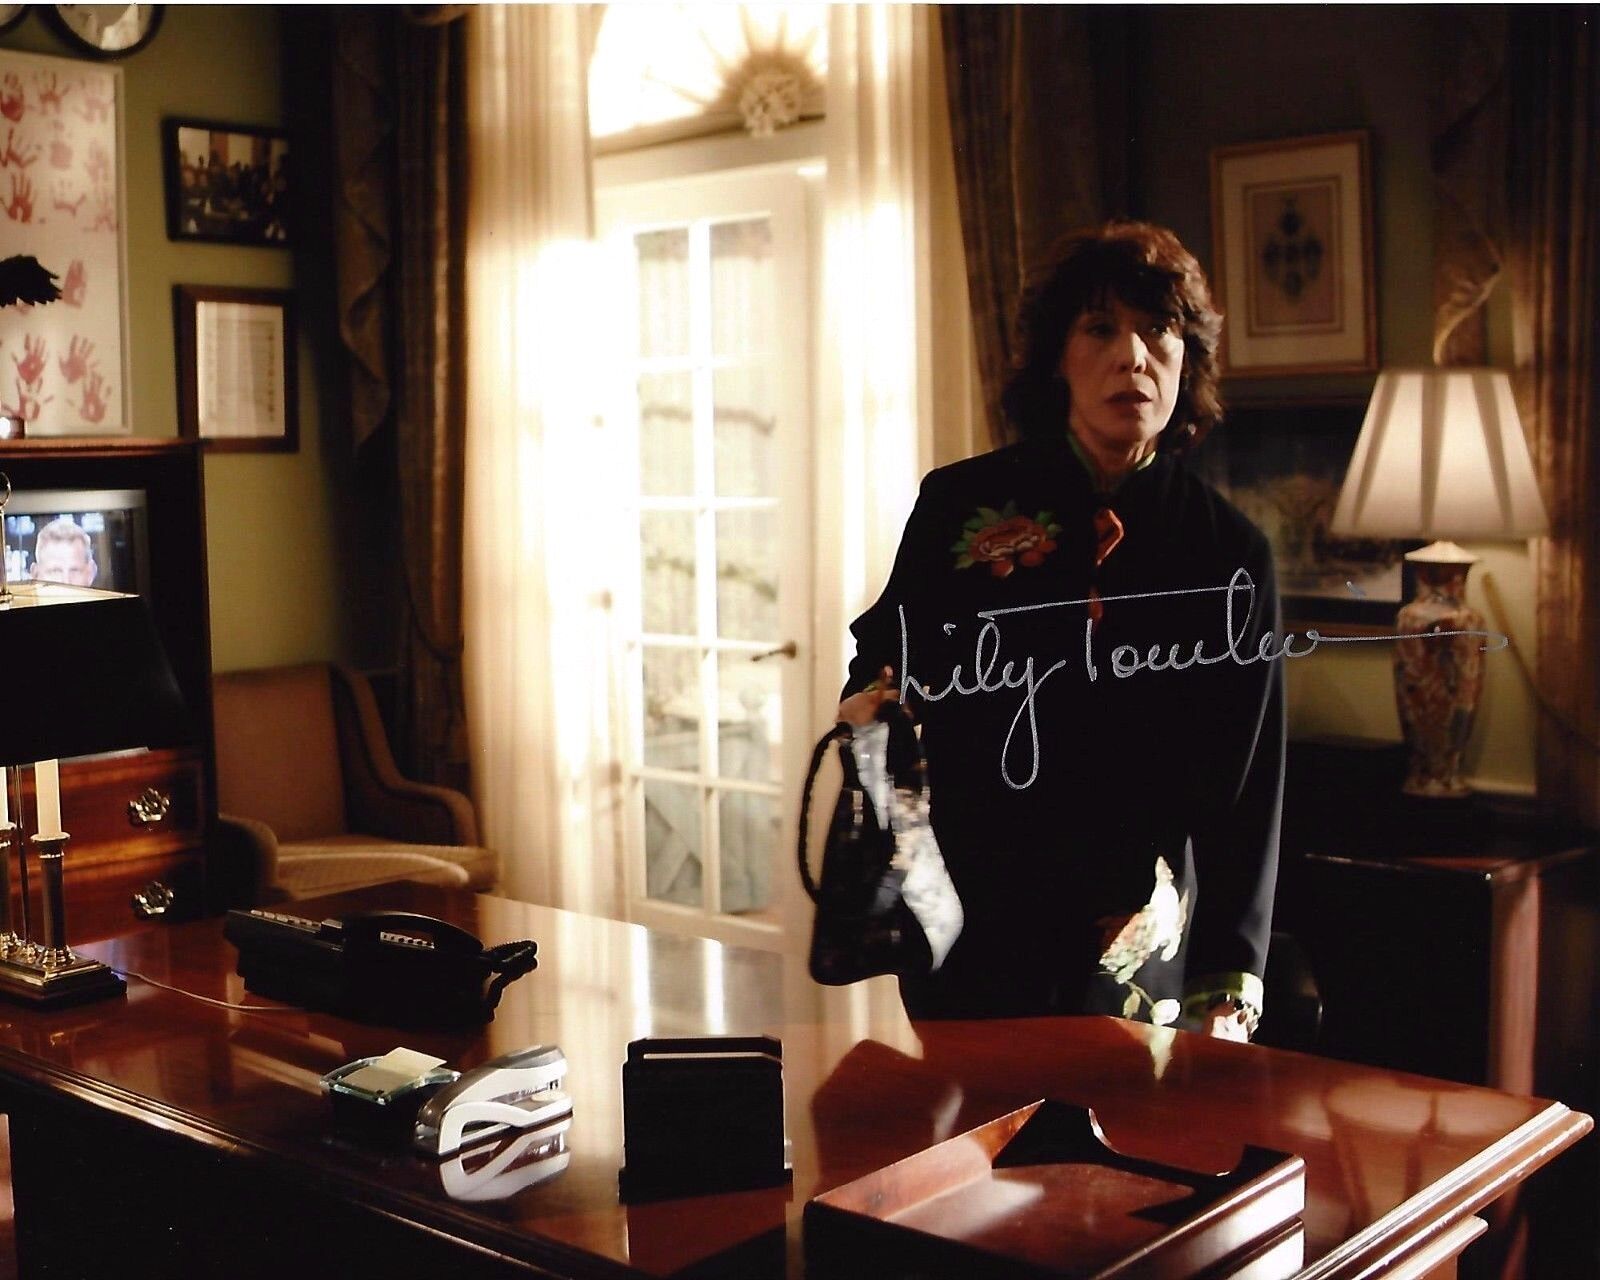 ACTRESS LILY TOMLIN HAND SIGNED THE WEST WING 8X10 Photo Poster painting B W/COA DEBBIE FIDERER